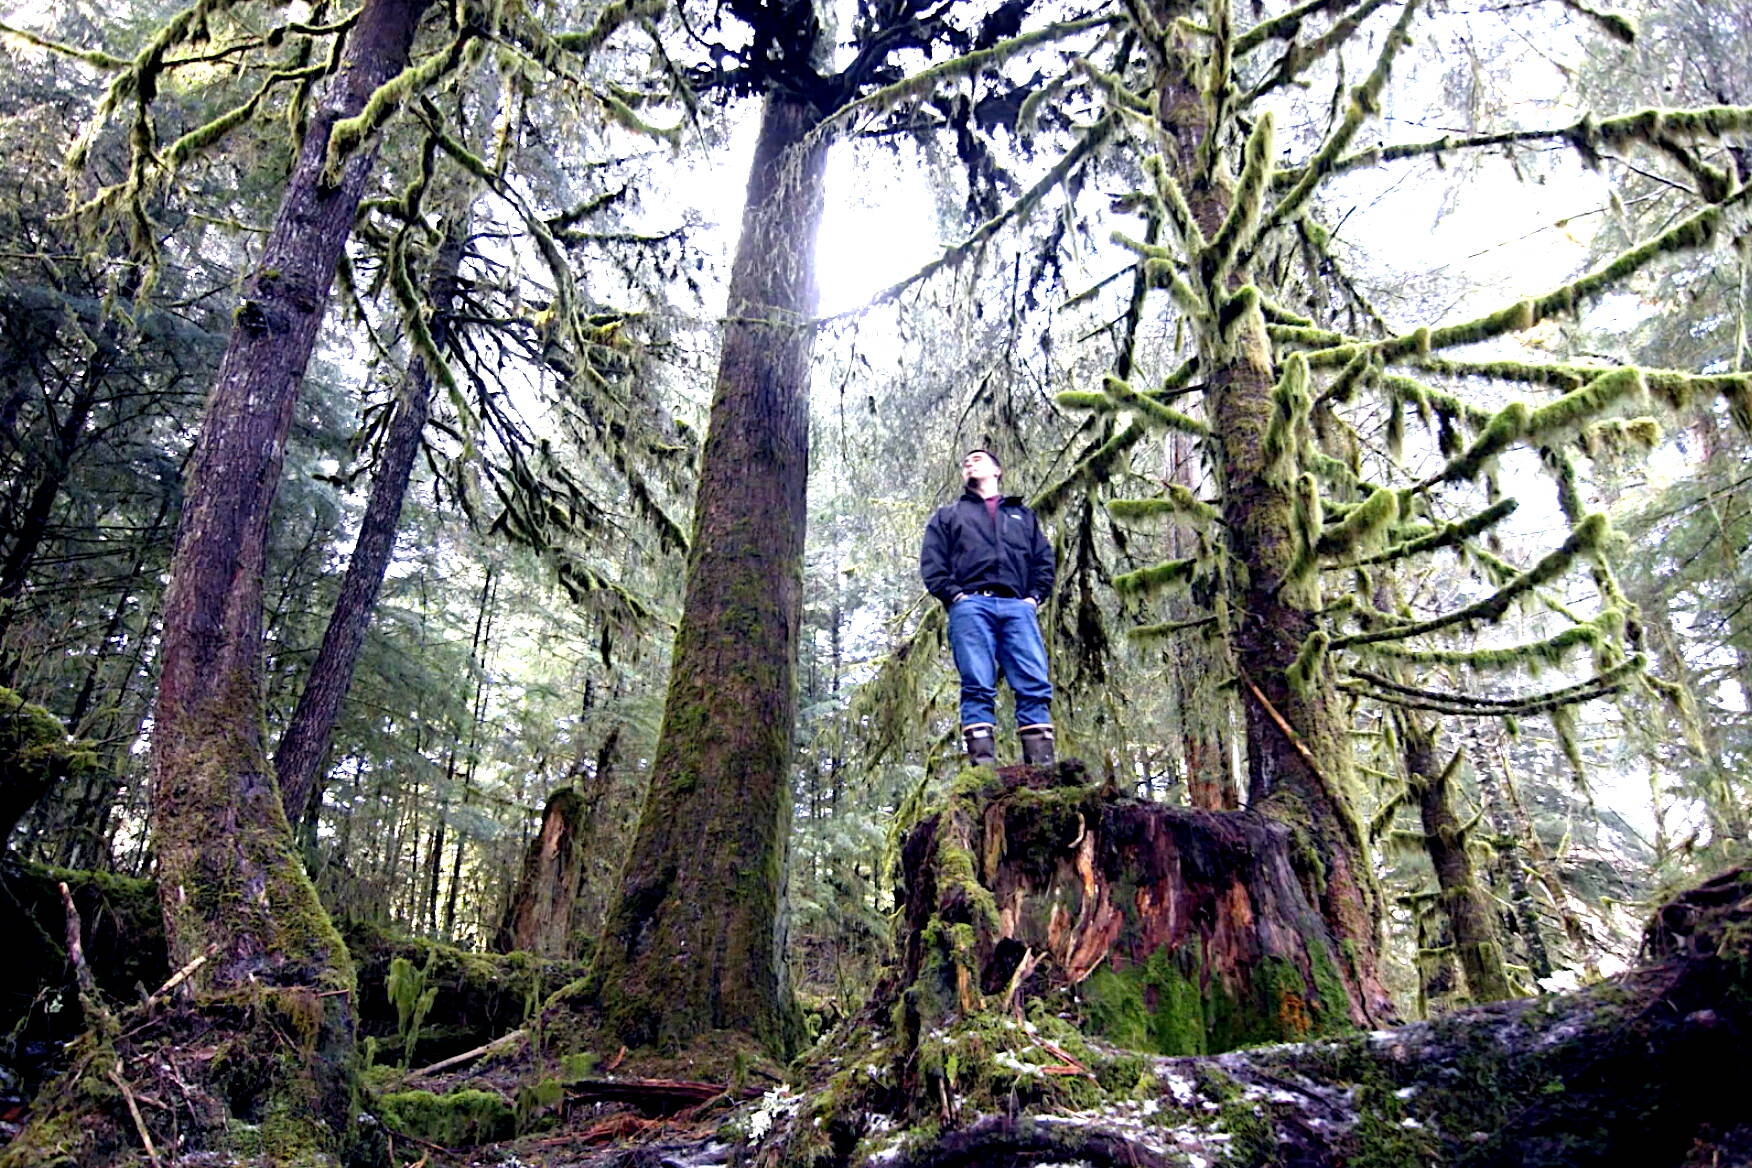 Screenshot from YouTube video by Sealaska Corp.
Mitchell Haldane, Sealaska’s carbon offset administrator, surveys forest land owned by the Juneau-based Alaska Native corporation that has earned more than $100 million since 2016 by putting the property into California’s carbon credits markets, which is paying to keep the land unharvested for 100 years.